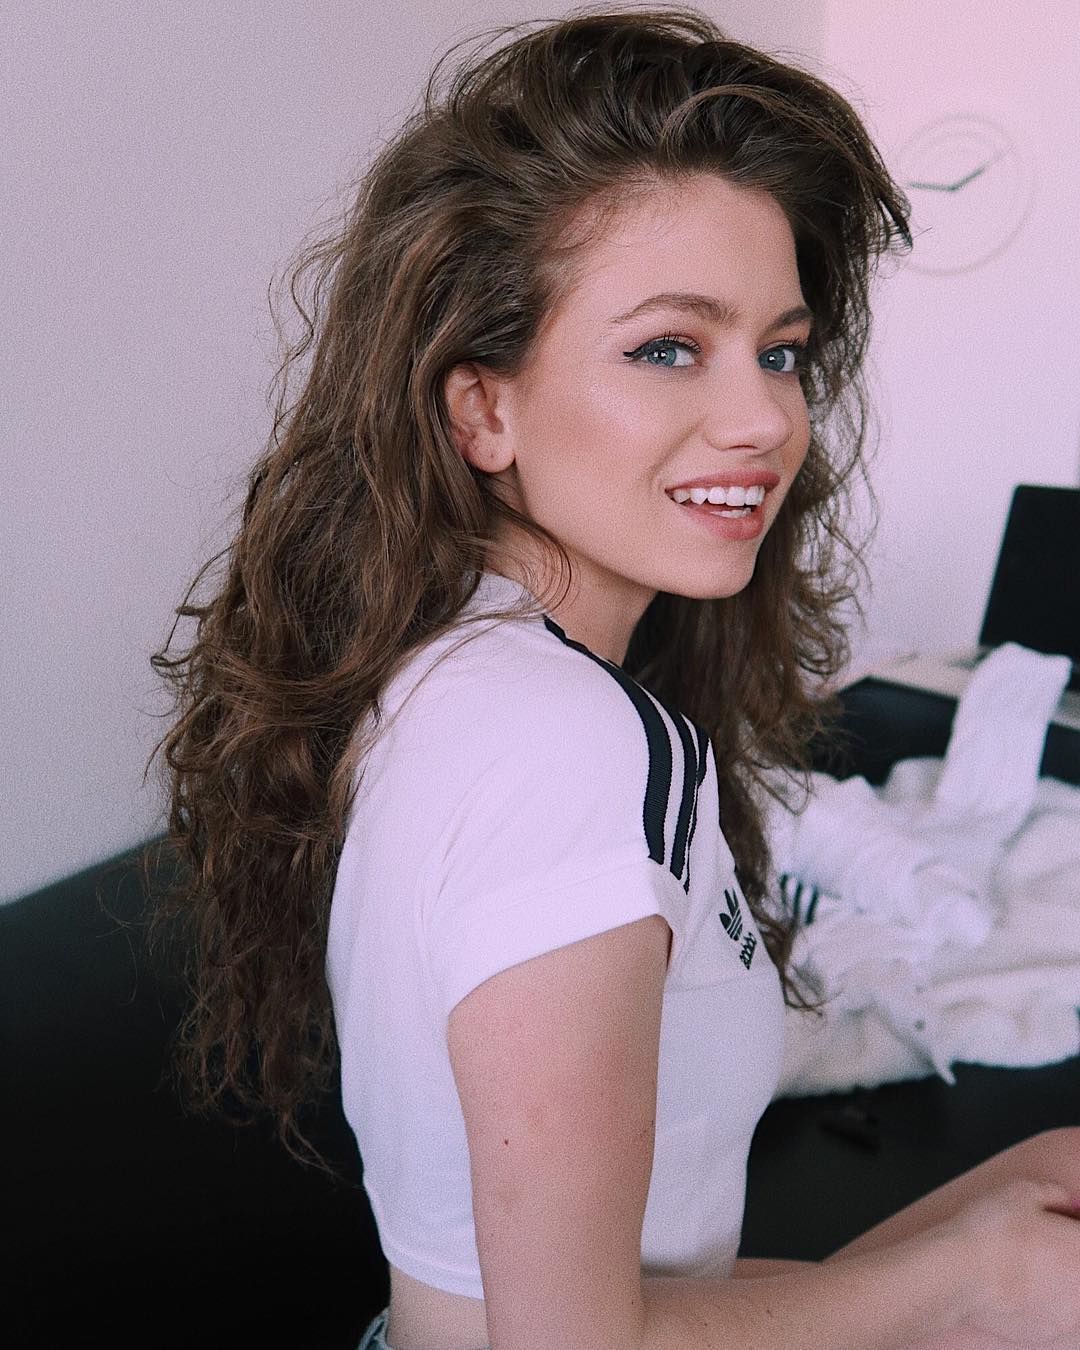 Dytto Biodata, Movies, Net-worth, Age, New Movies, Affairs, New Look, Songs